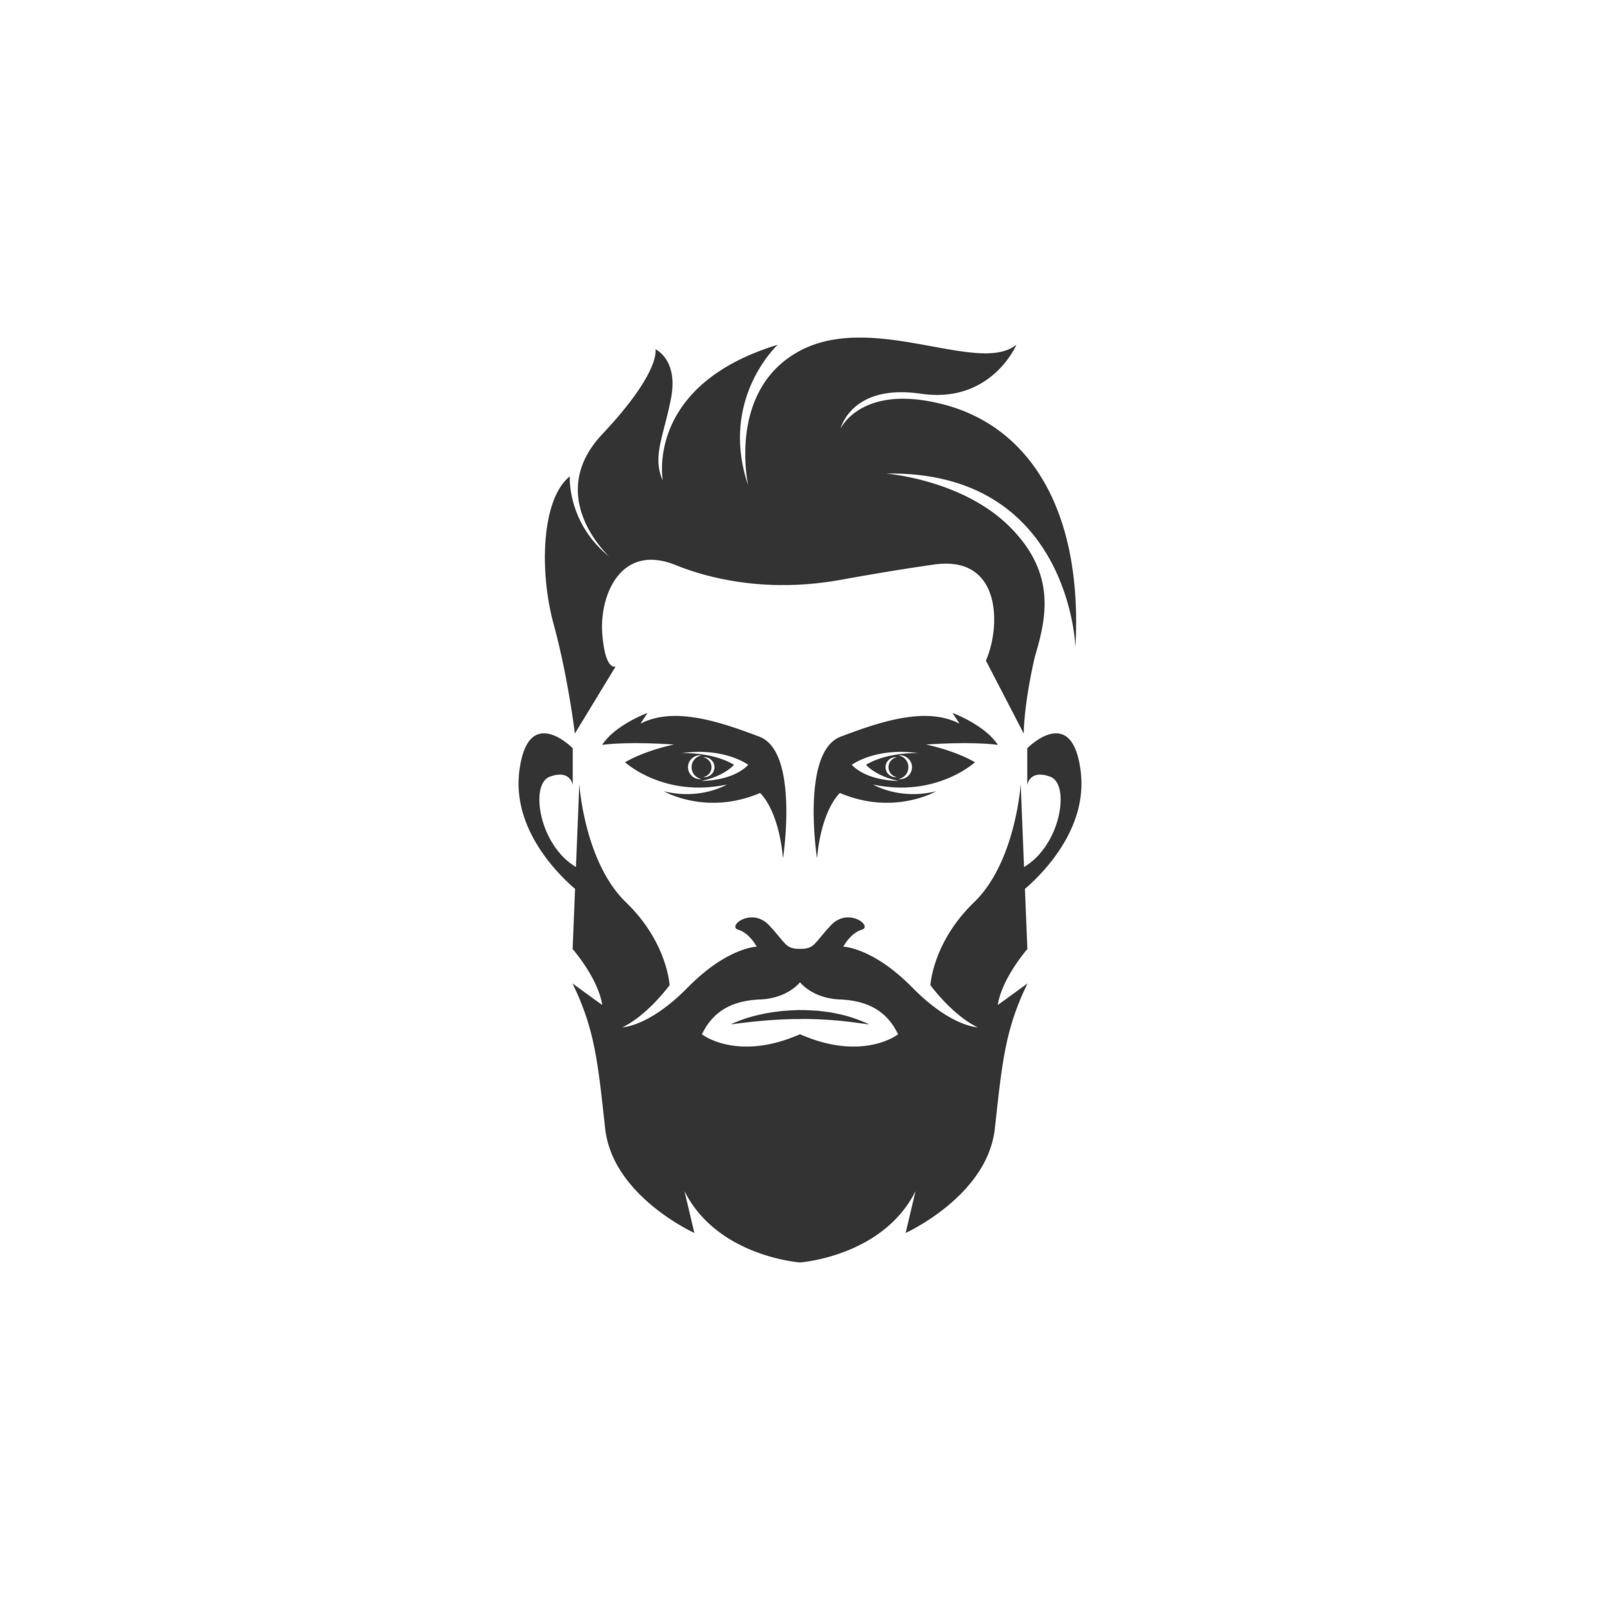 Men's hairstyle icon design illustration template